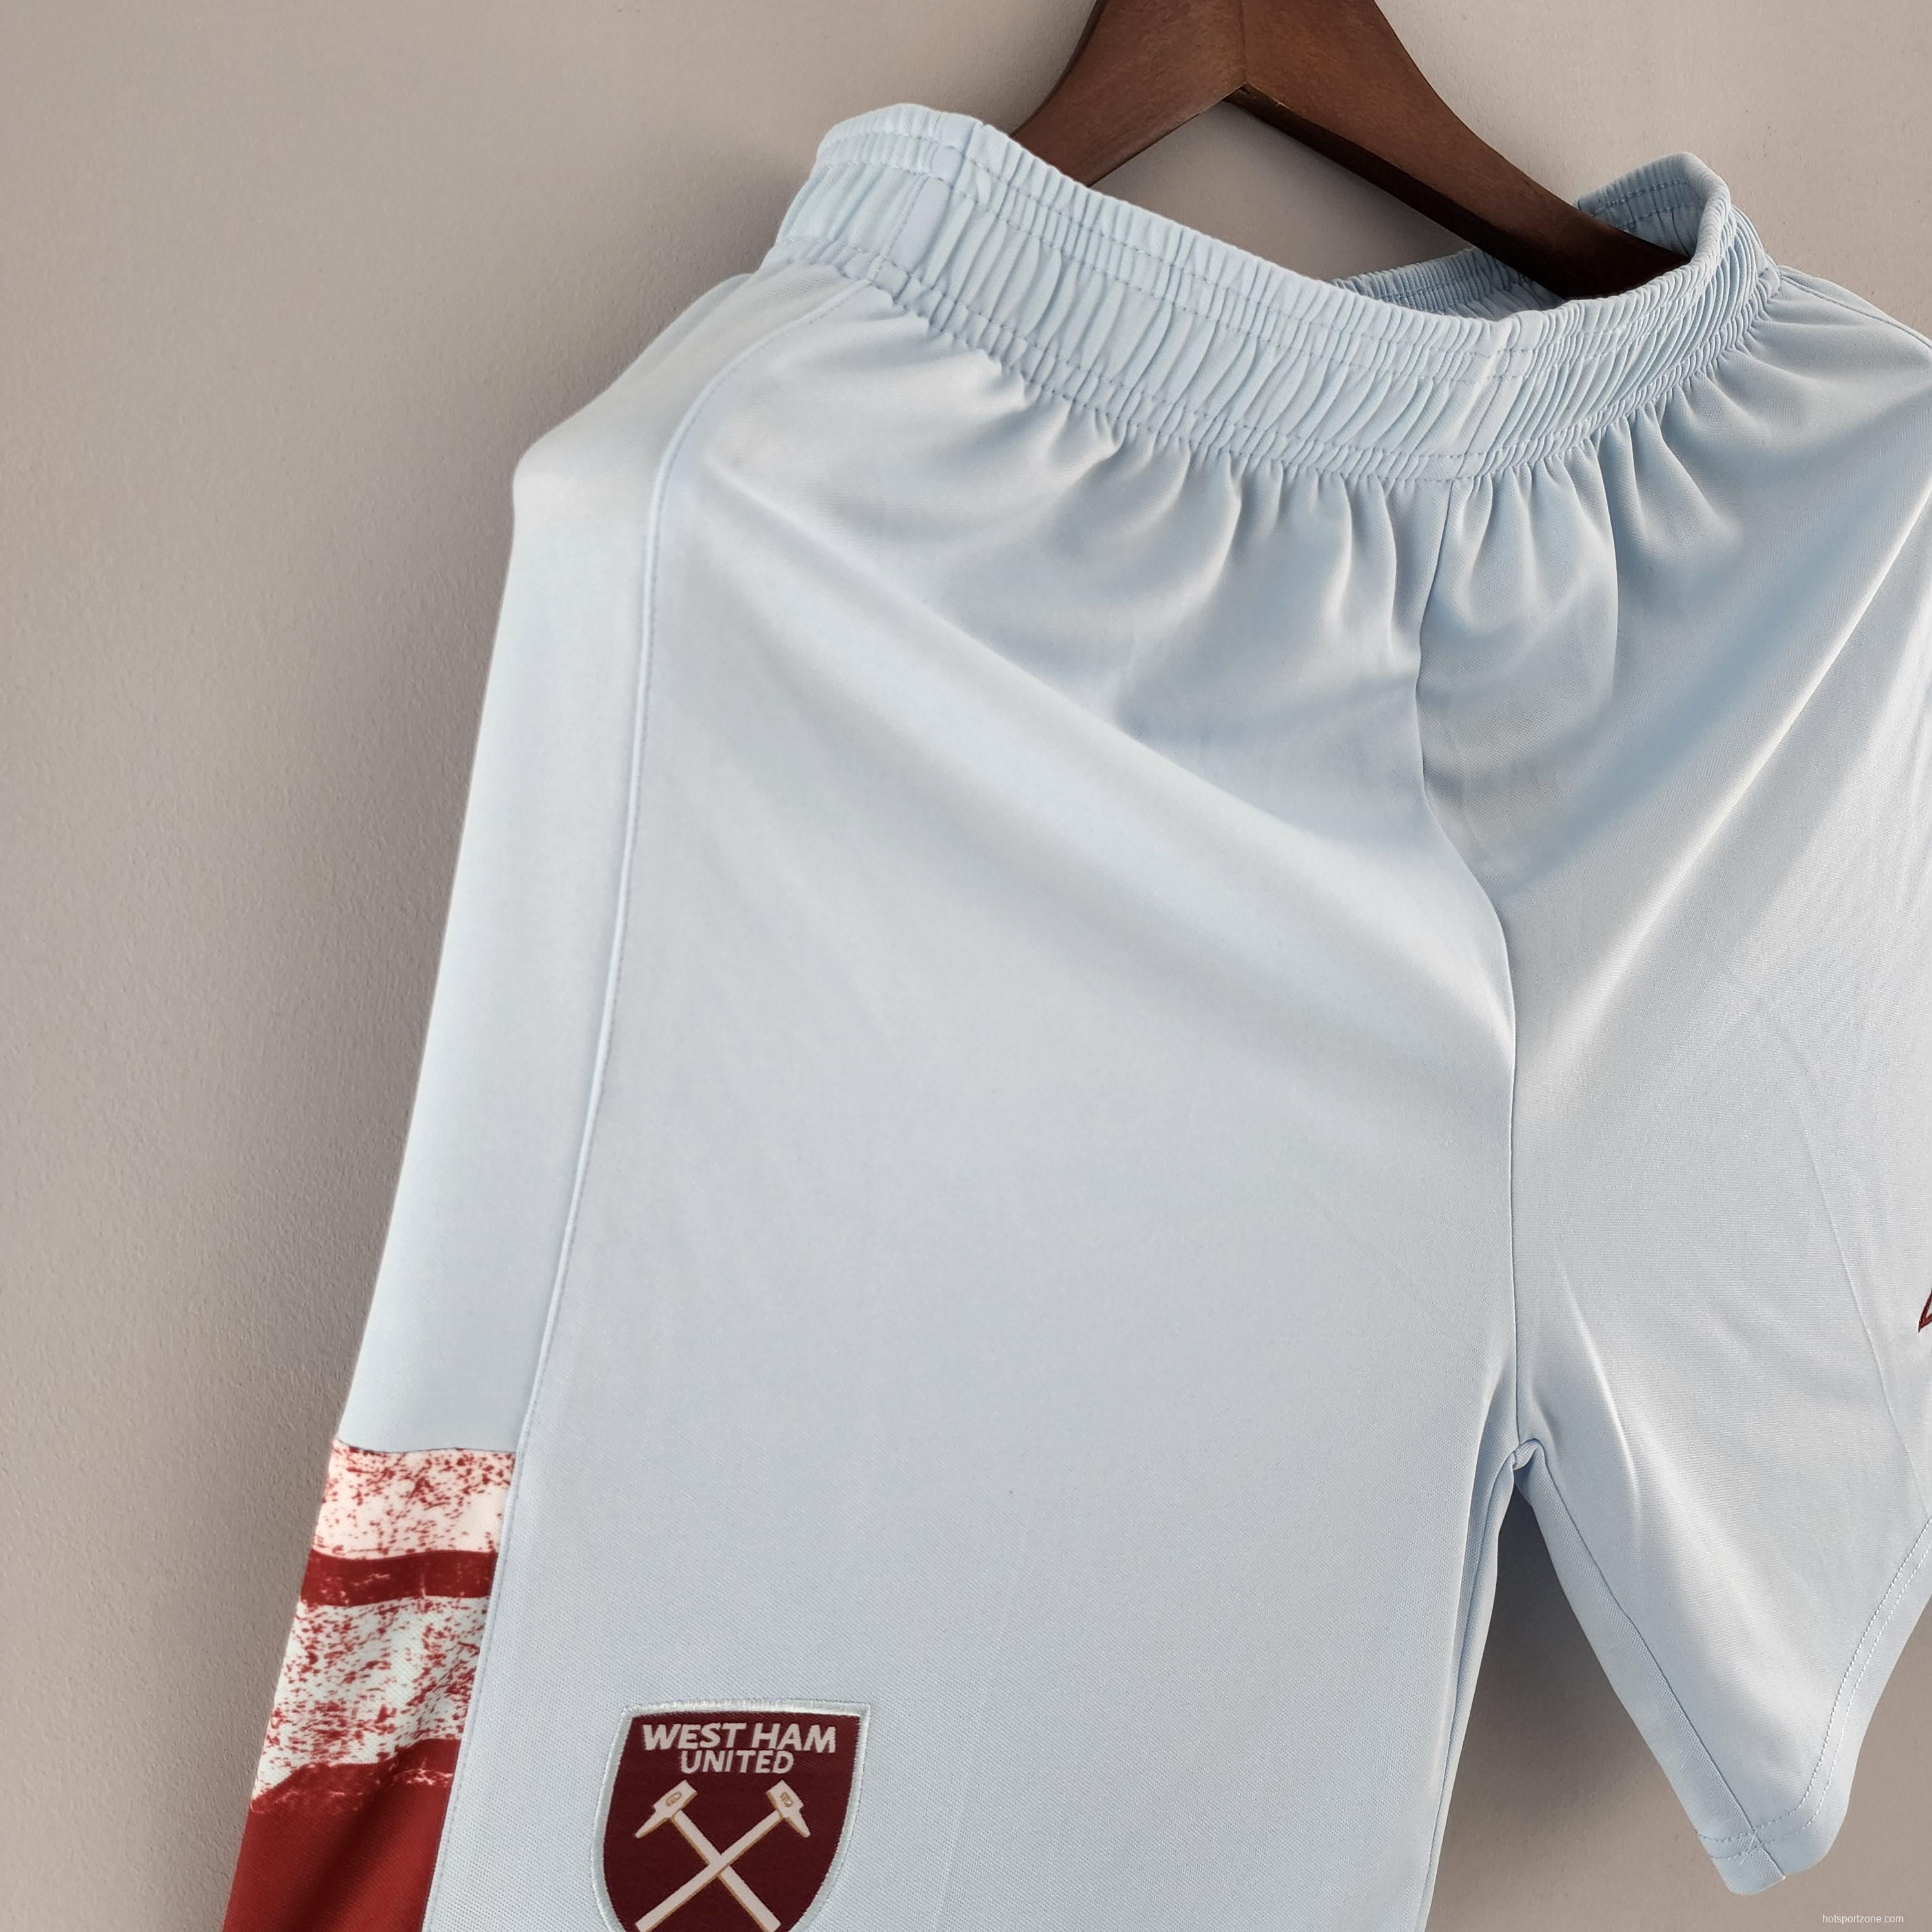 22/23 West Ham United Shorts Home Soccer Jersey